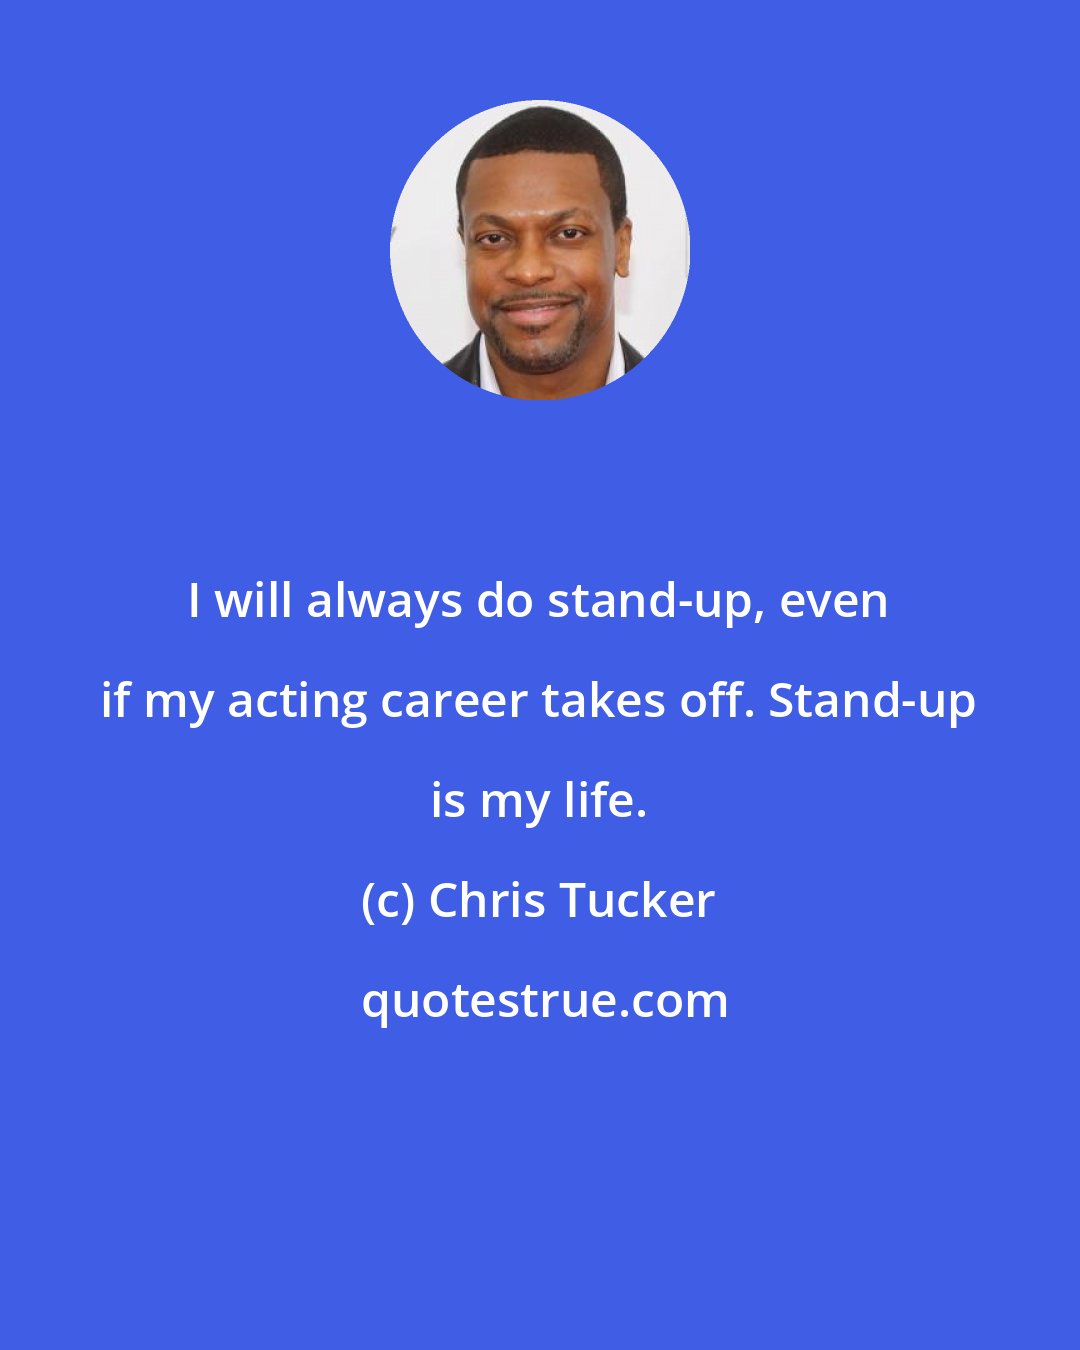 Chris Tucker: I will always do stand-up, even if my acting career takes off. Stand-up is my life.